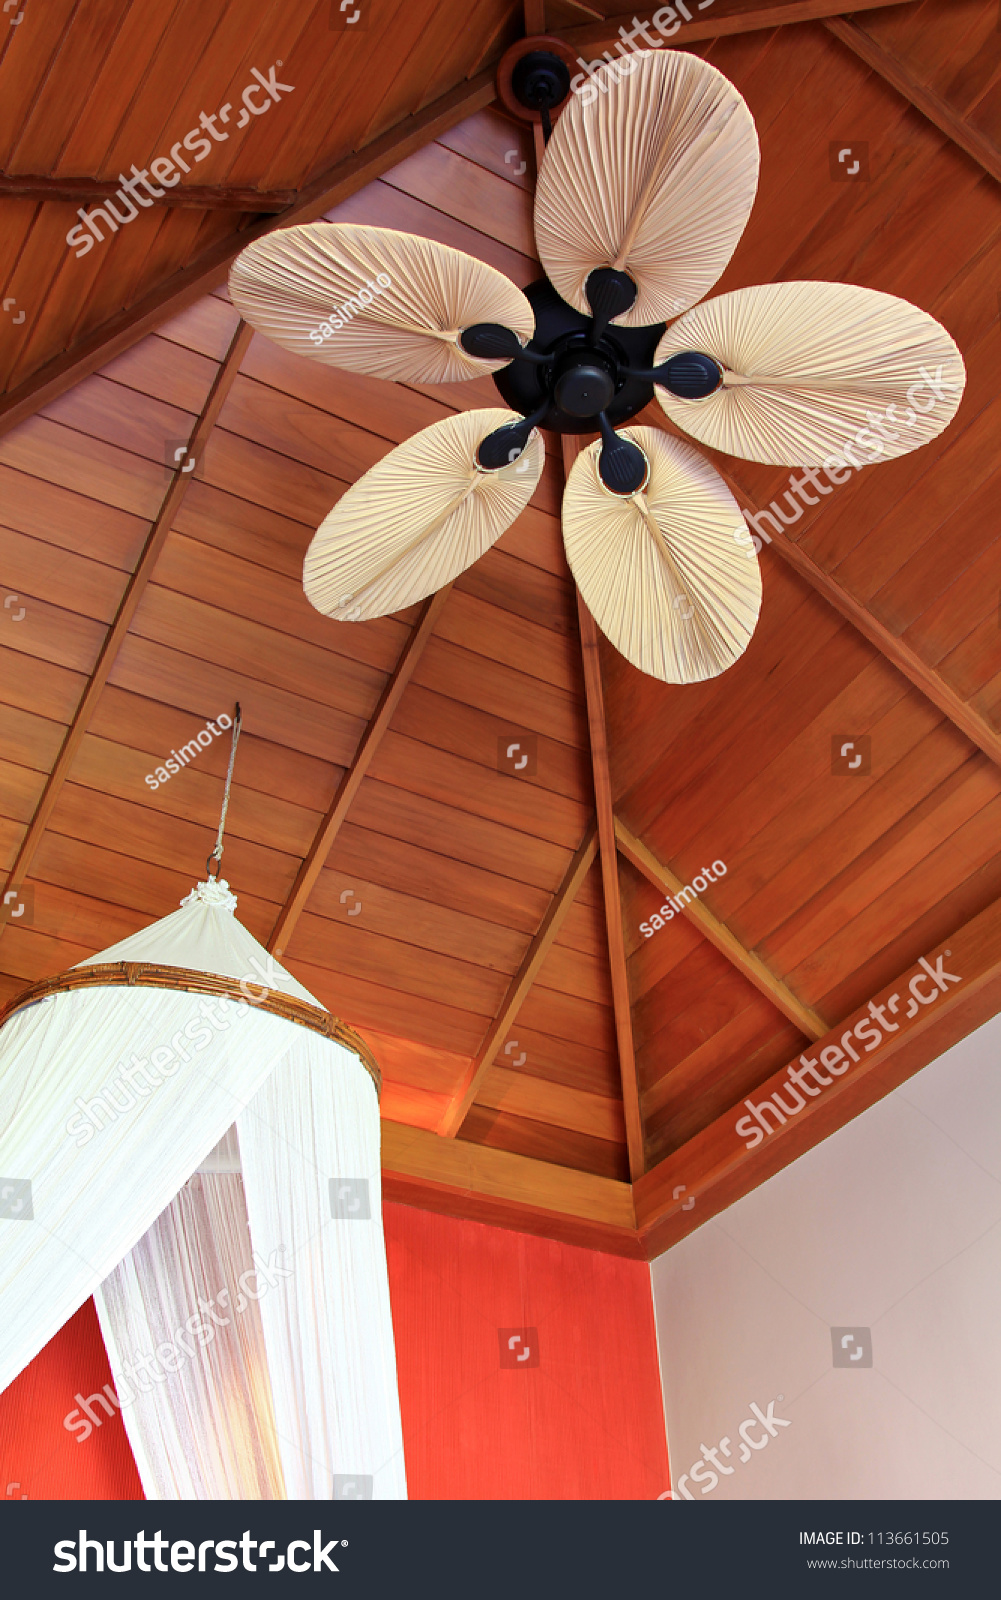 Room Decorated Asian Style Architecture Palm Stock Photo 113661505 ... - A Room decorated with Asian style architecture, with Palm Leaf Shaped Ceiling  Fan Blade and